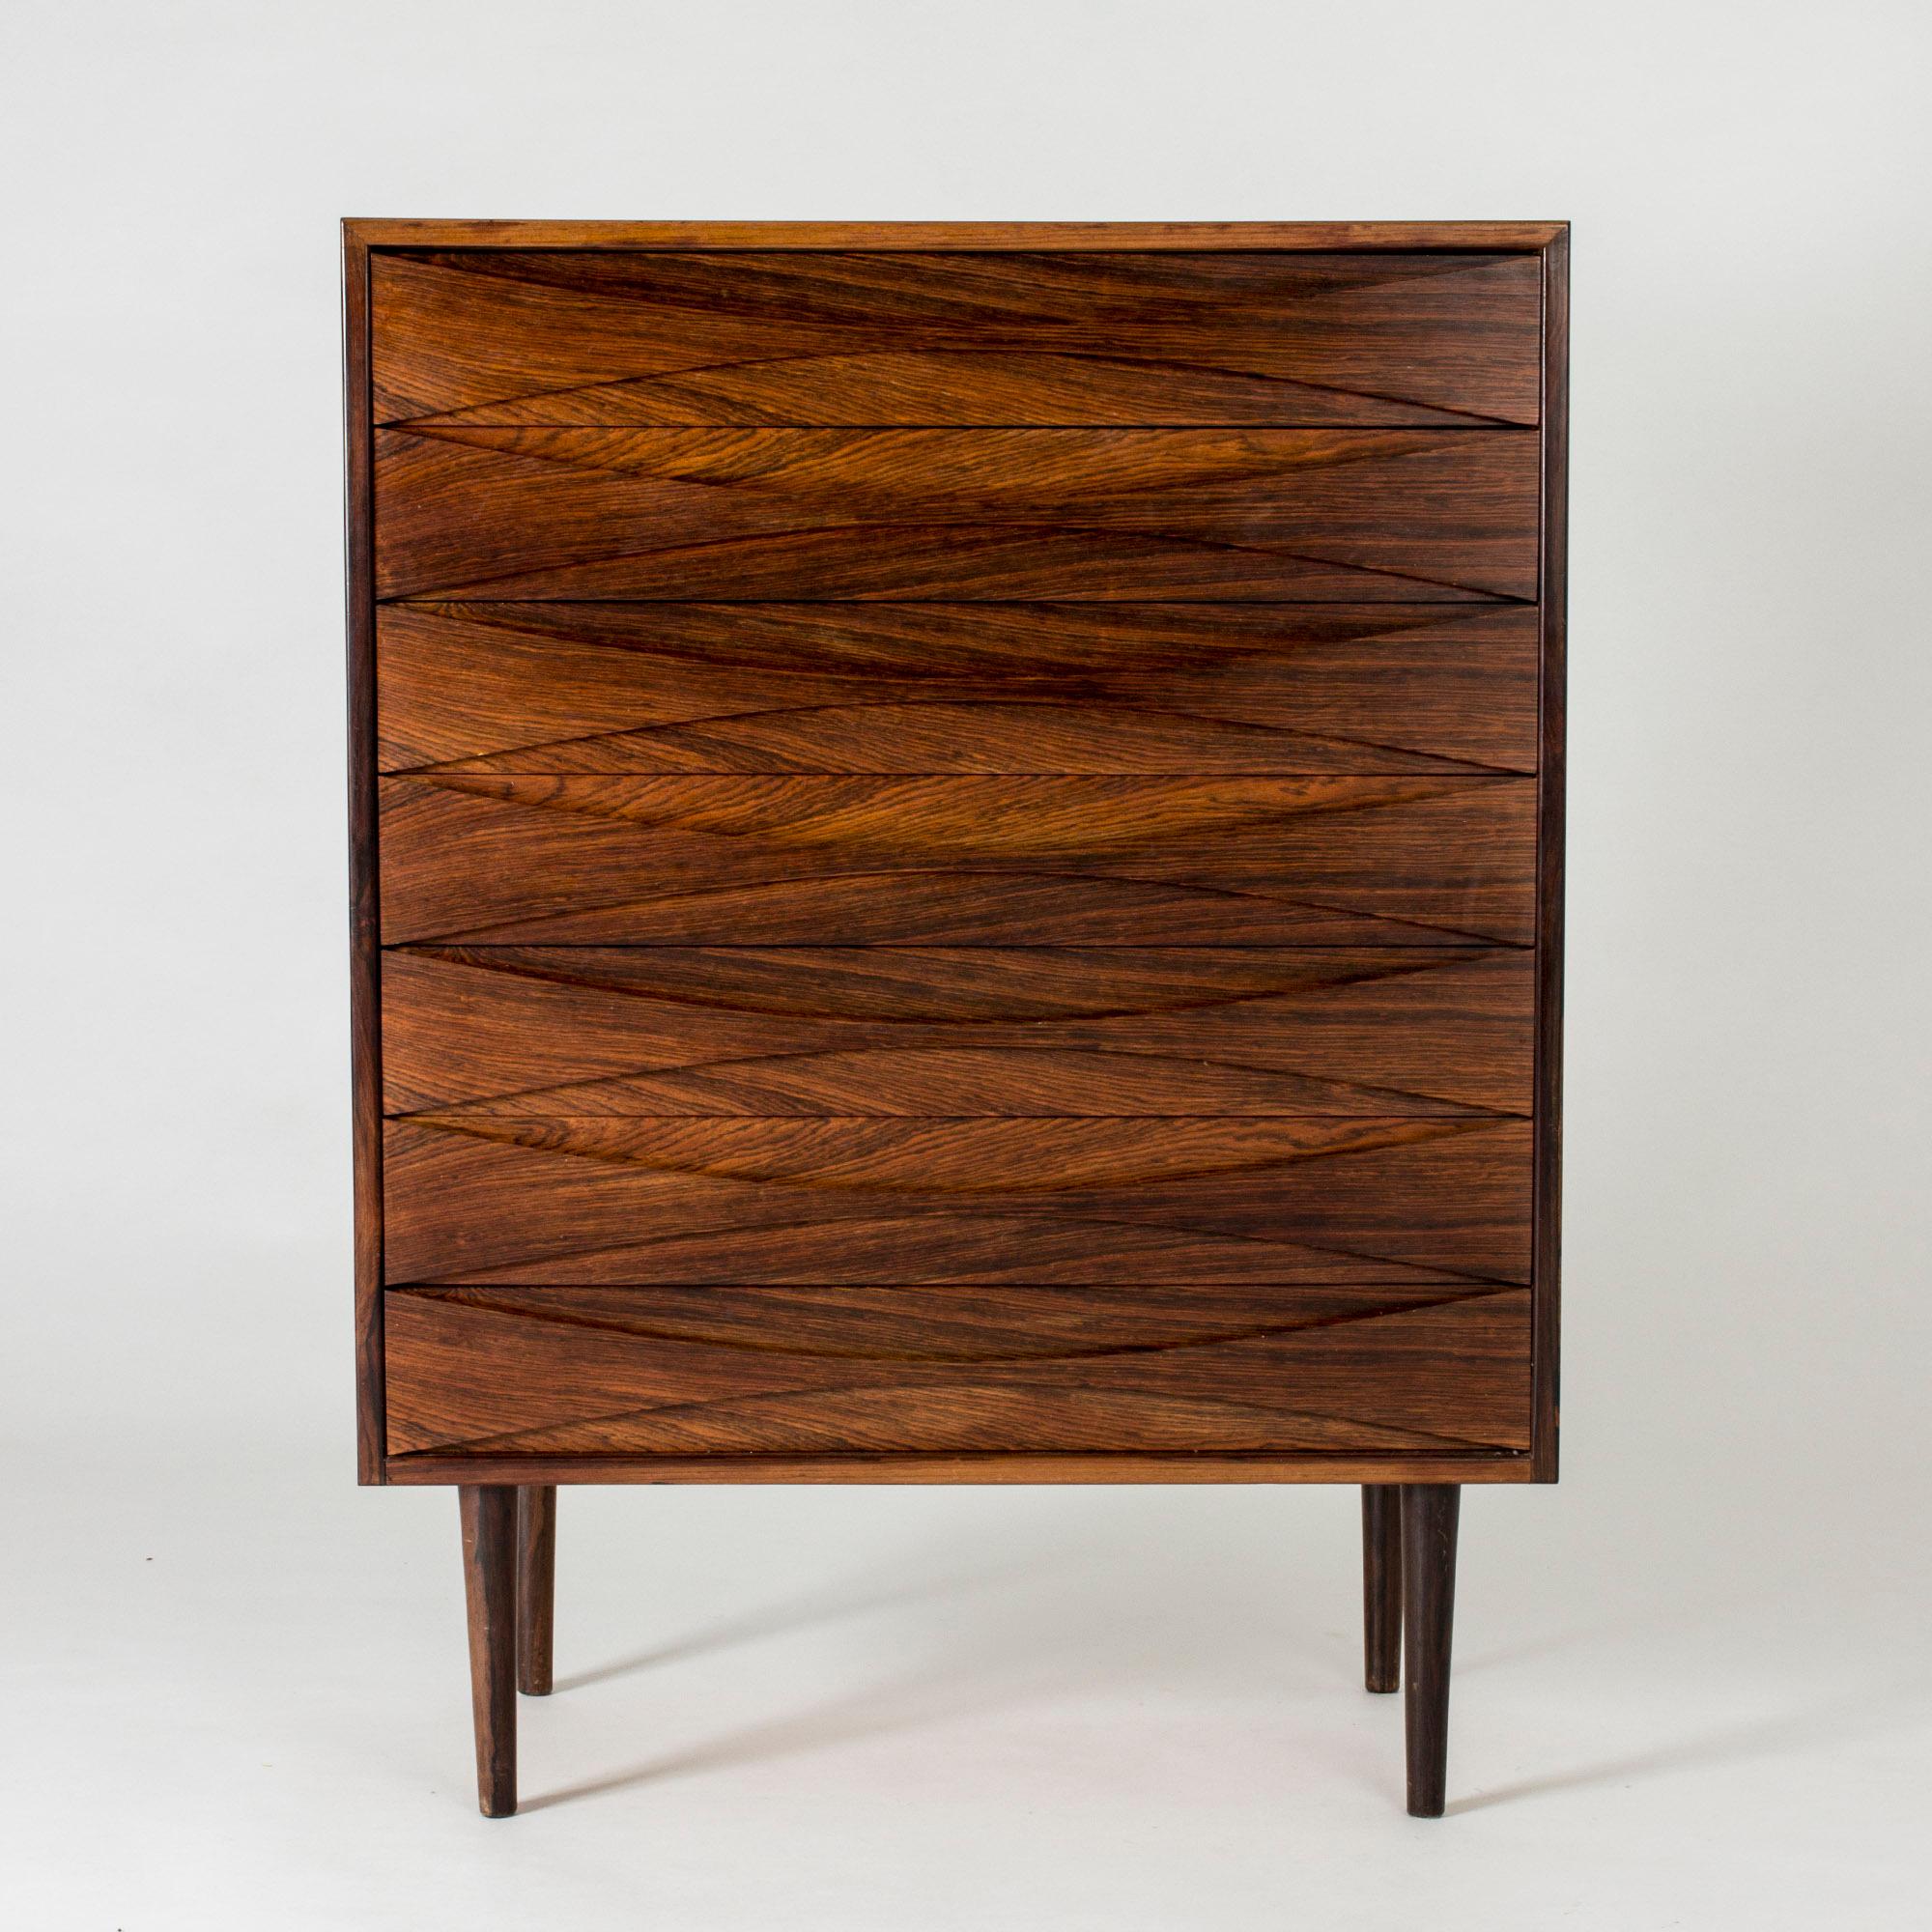 Rosewood chest of drawers by Arne Vodder, where the fronts of the drawers form a striking design. Amazing play between the curved lines and pattern of the wood grain. Professional repair on the top.